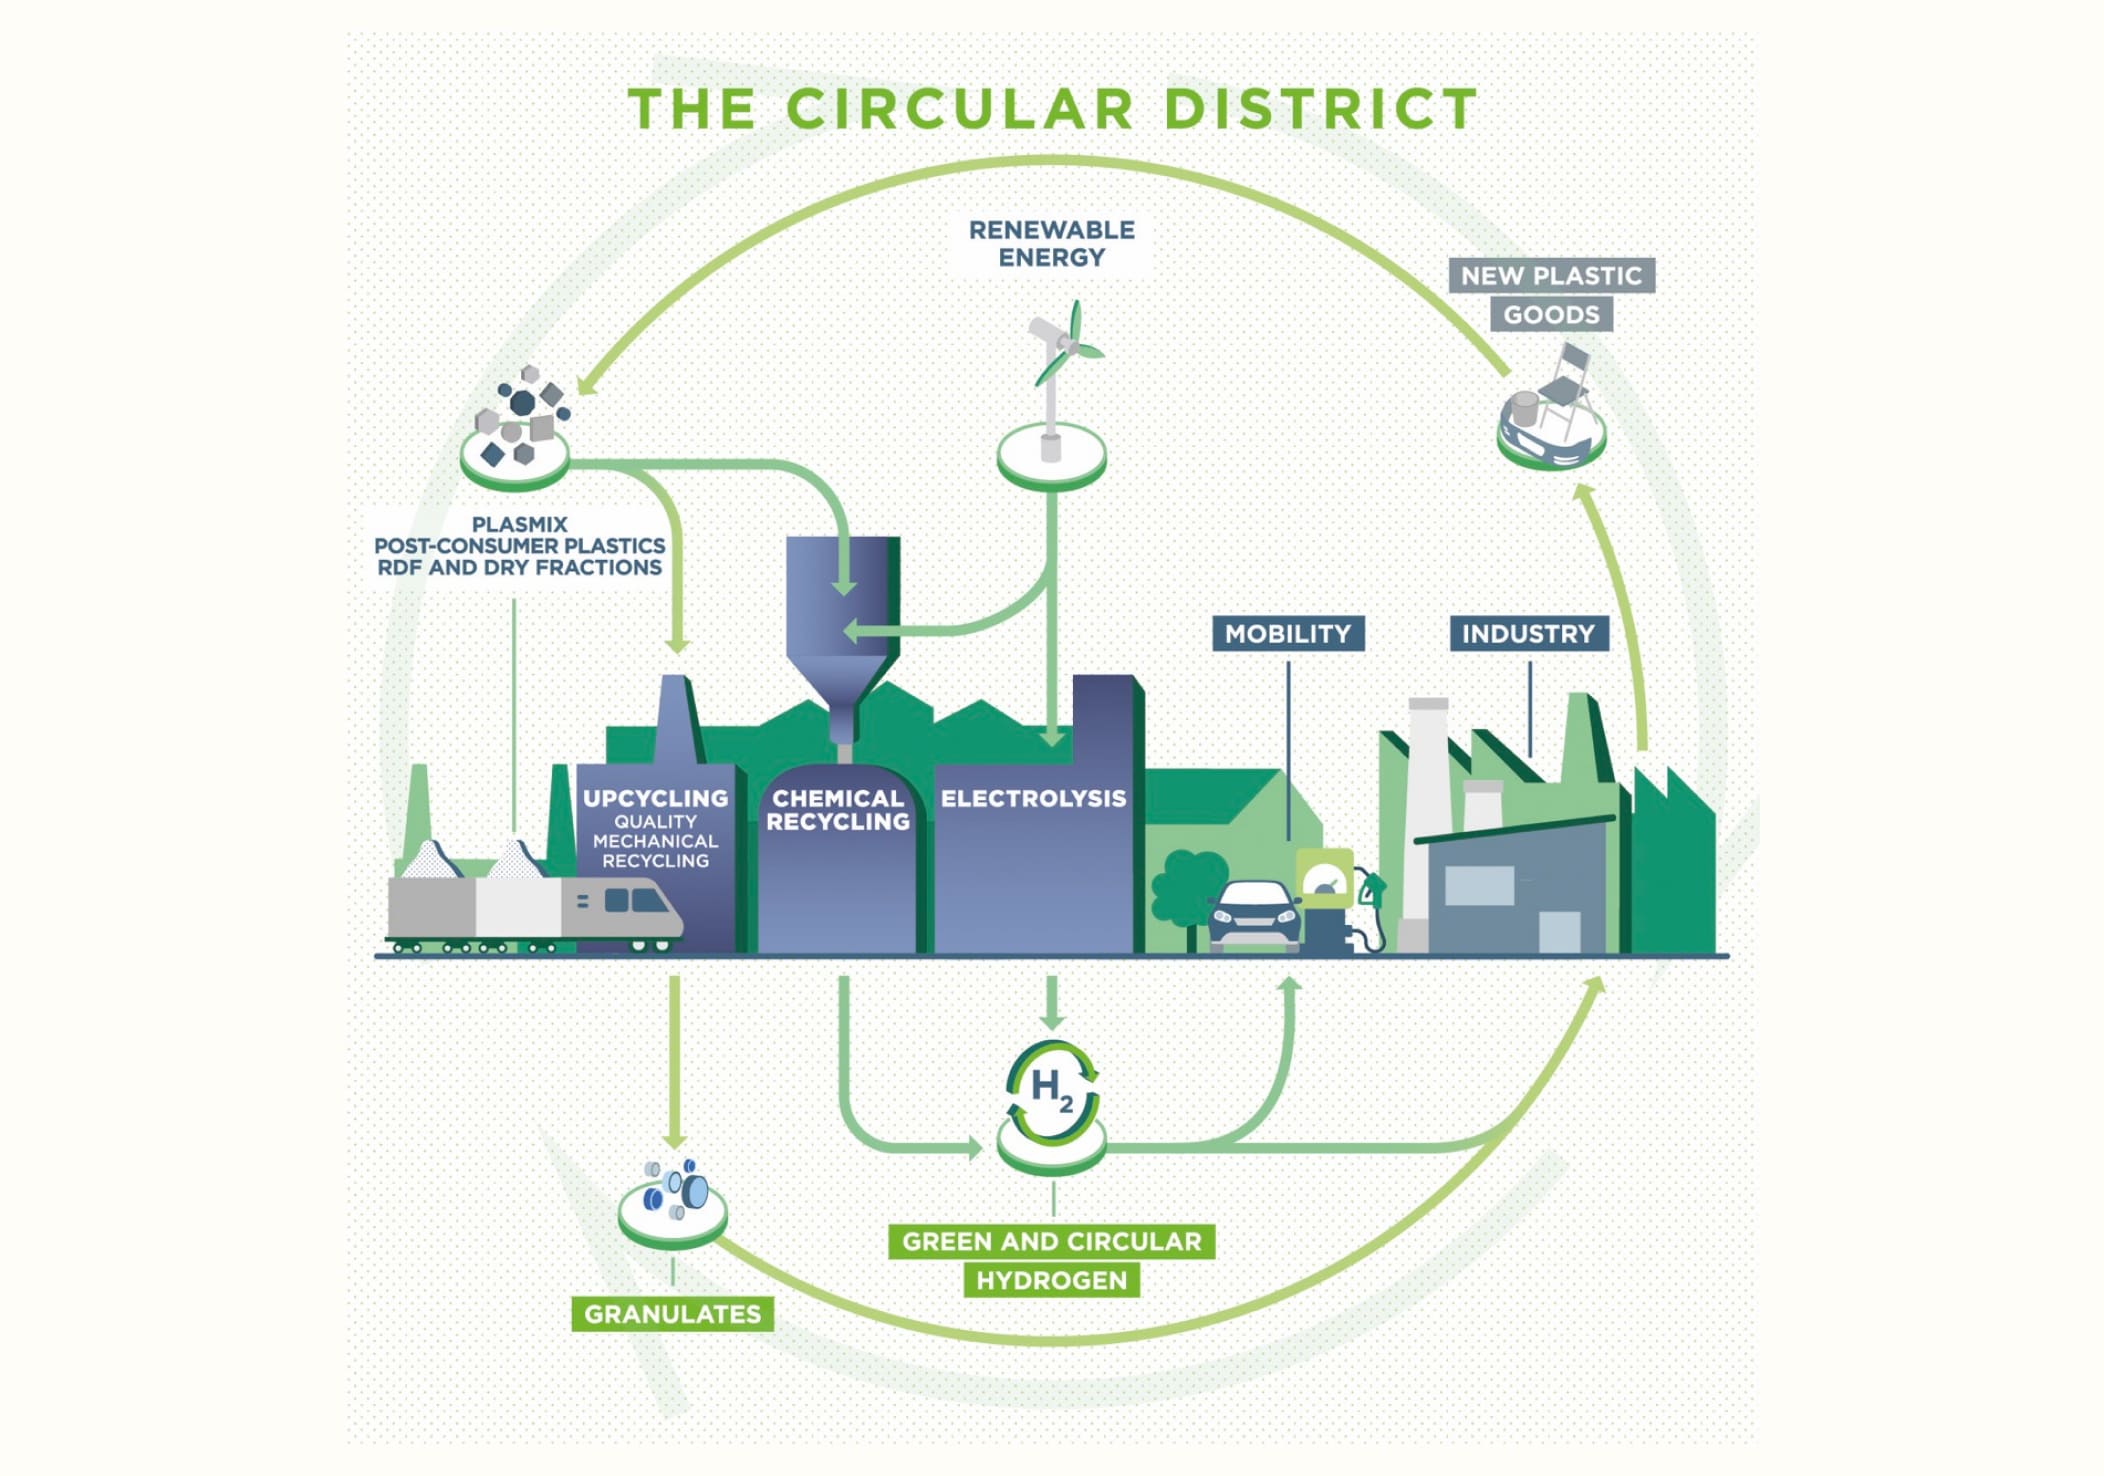 The green model of circular districts